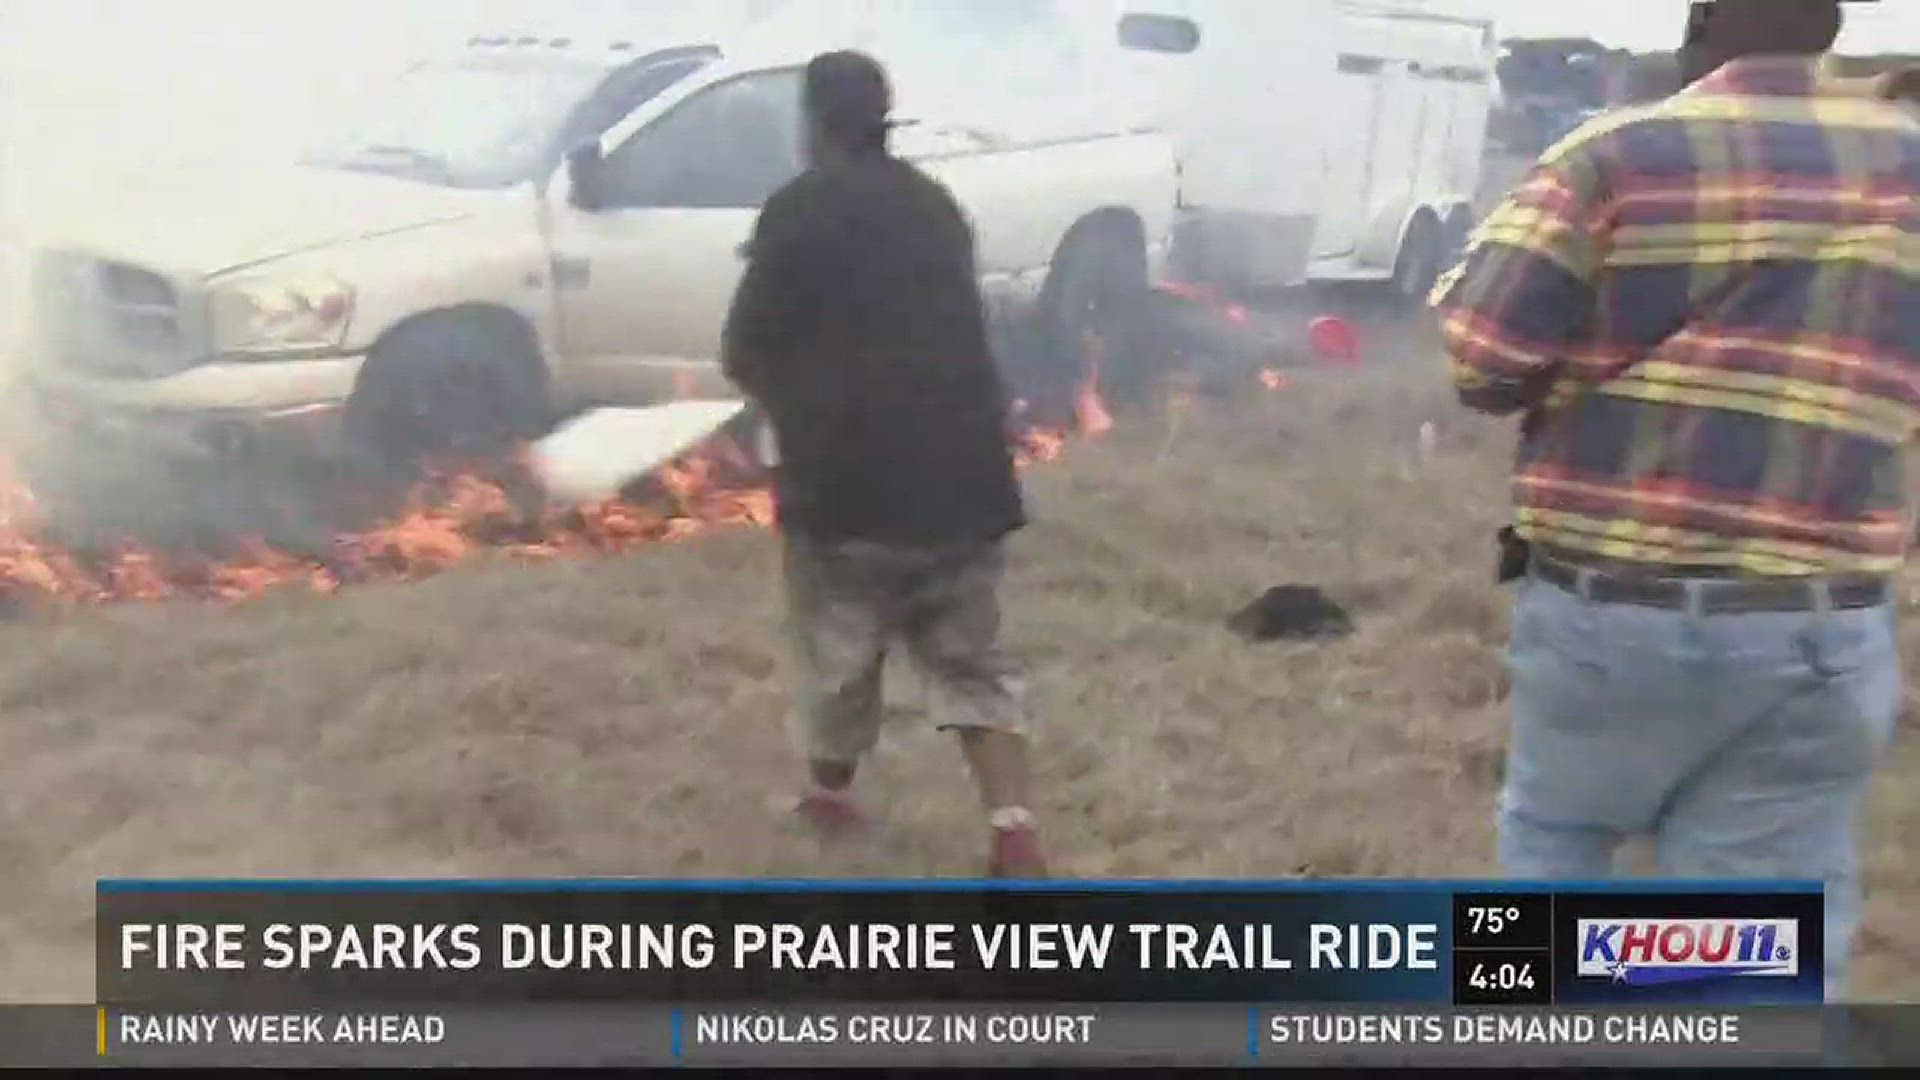 There was a scare for Prairie View trail riders Monday afternoon when a fire broke out where they had set up camp. "Somebody yelled 'Fire!", we saw smoke and within seconds, the fire was spreading," said KHOU 11's Blake Mathews. t's not clear what started